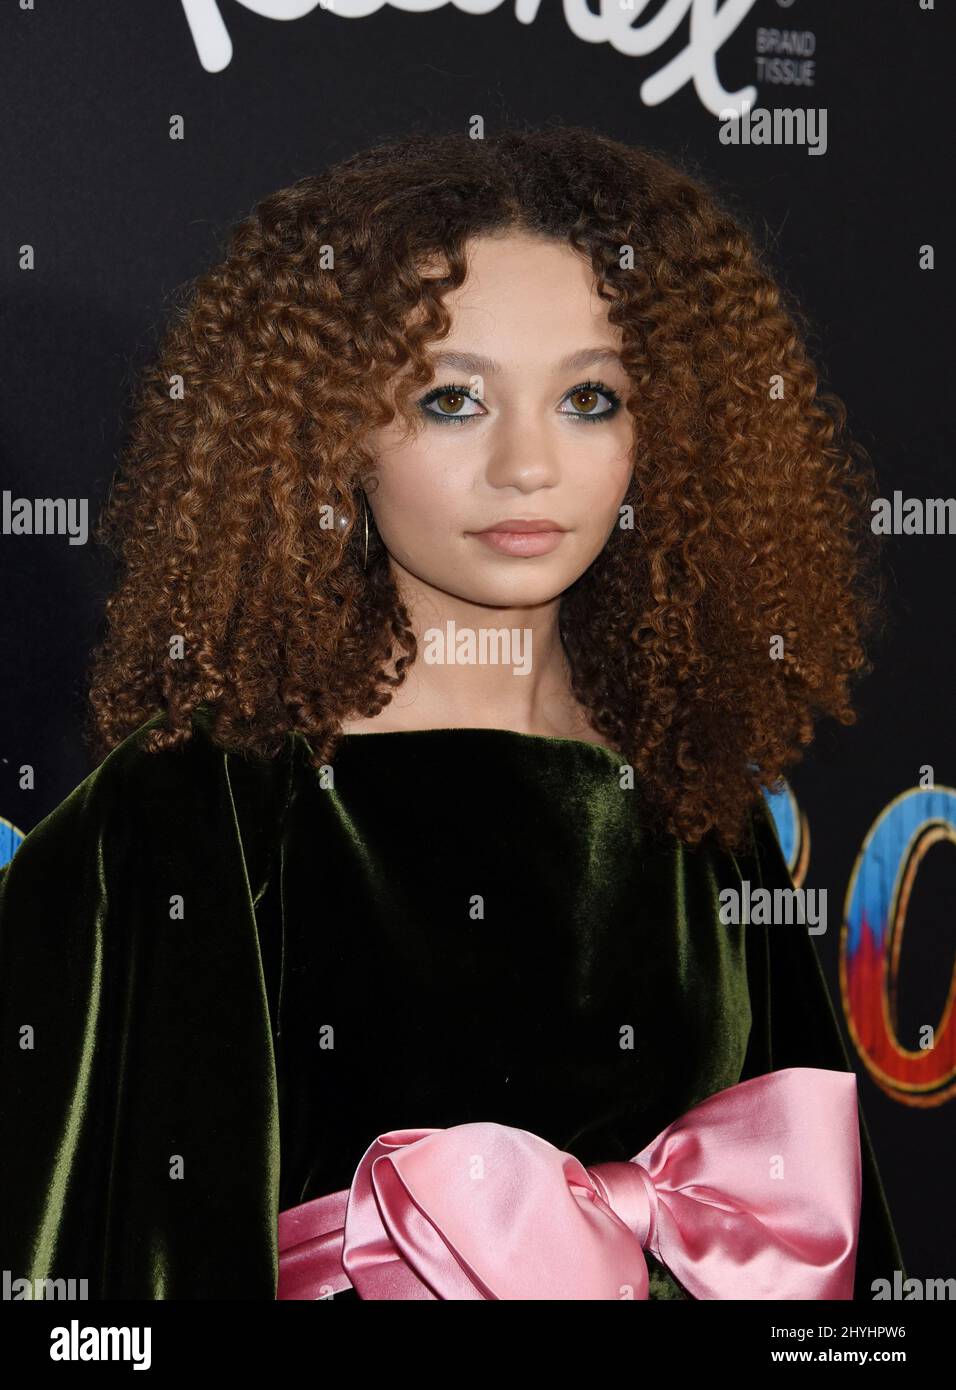 Nico Parker arriving for Disney's premiere of 'Dumbo' held at the El Capitan Theatre on March 11, 2019 in Hollywood, Los Angeles. Stock Photo